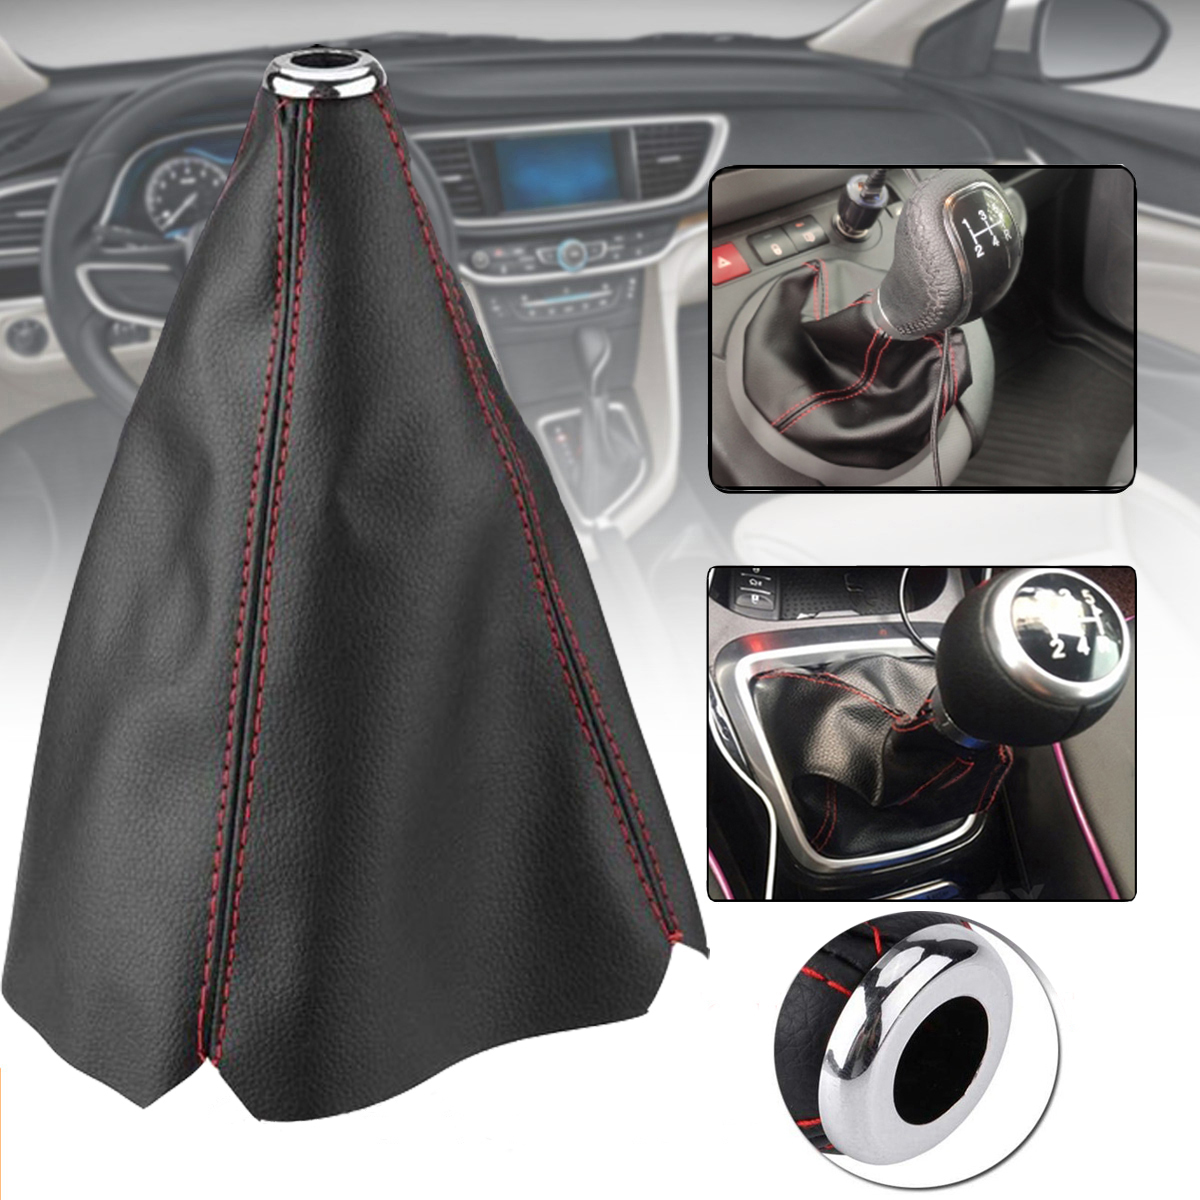 Shop Gear Shift Knob Cover Leather Universal online